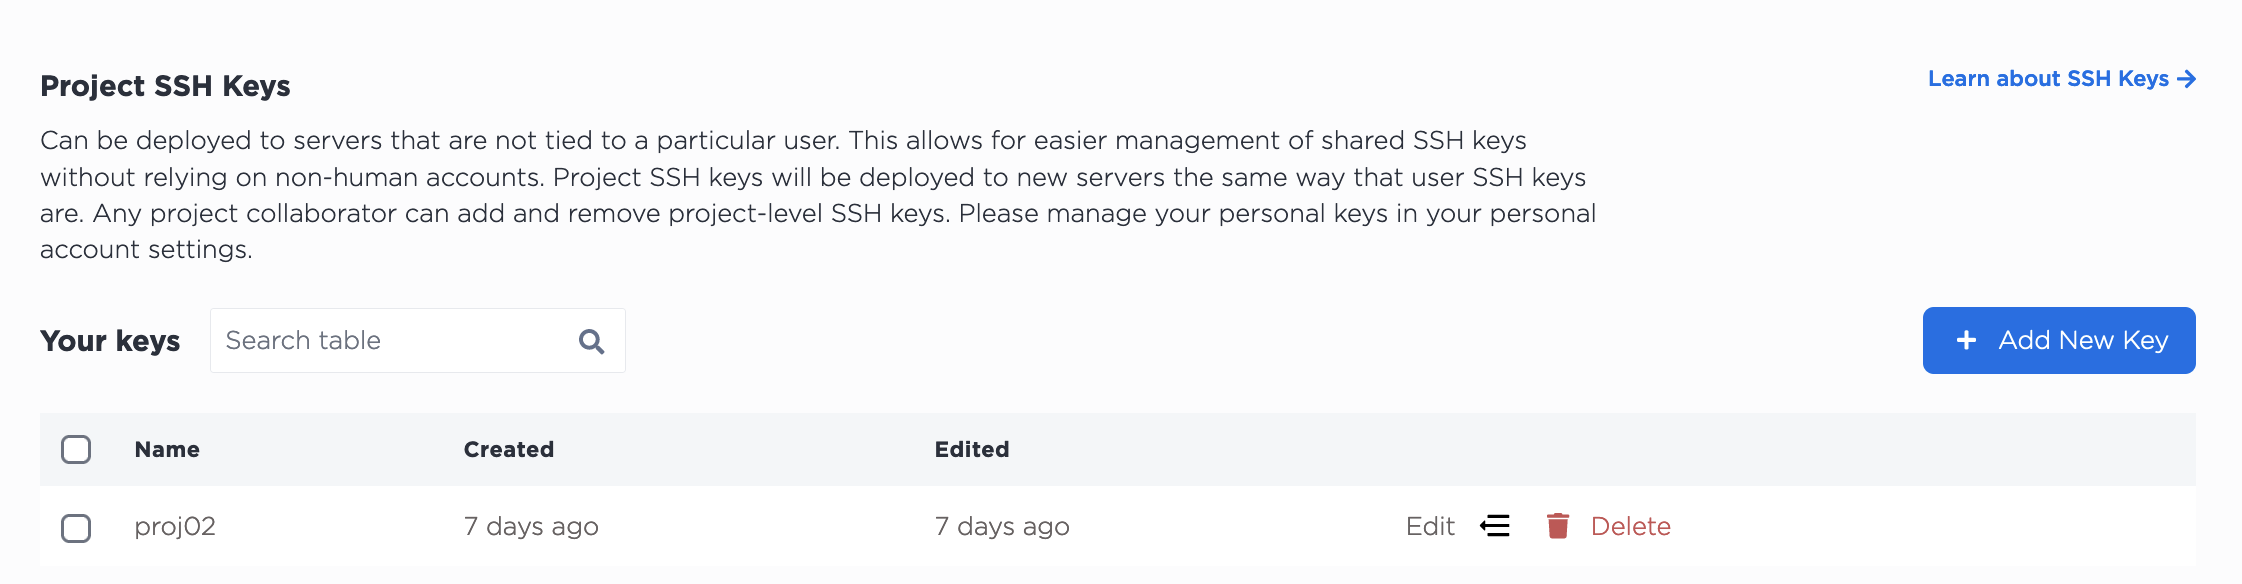 Deleting a Project SSH Key from the Console